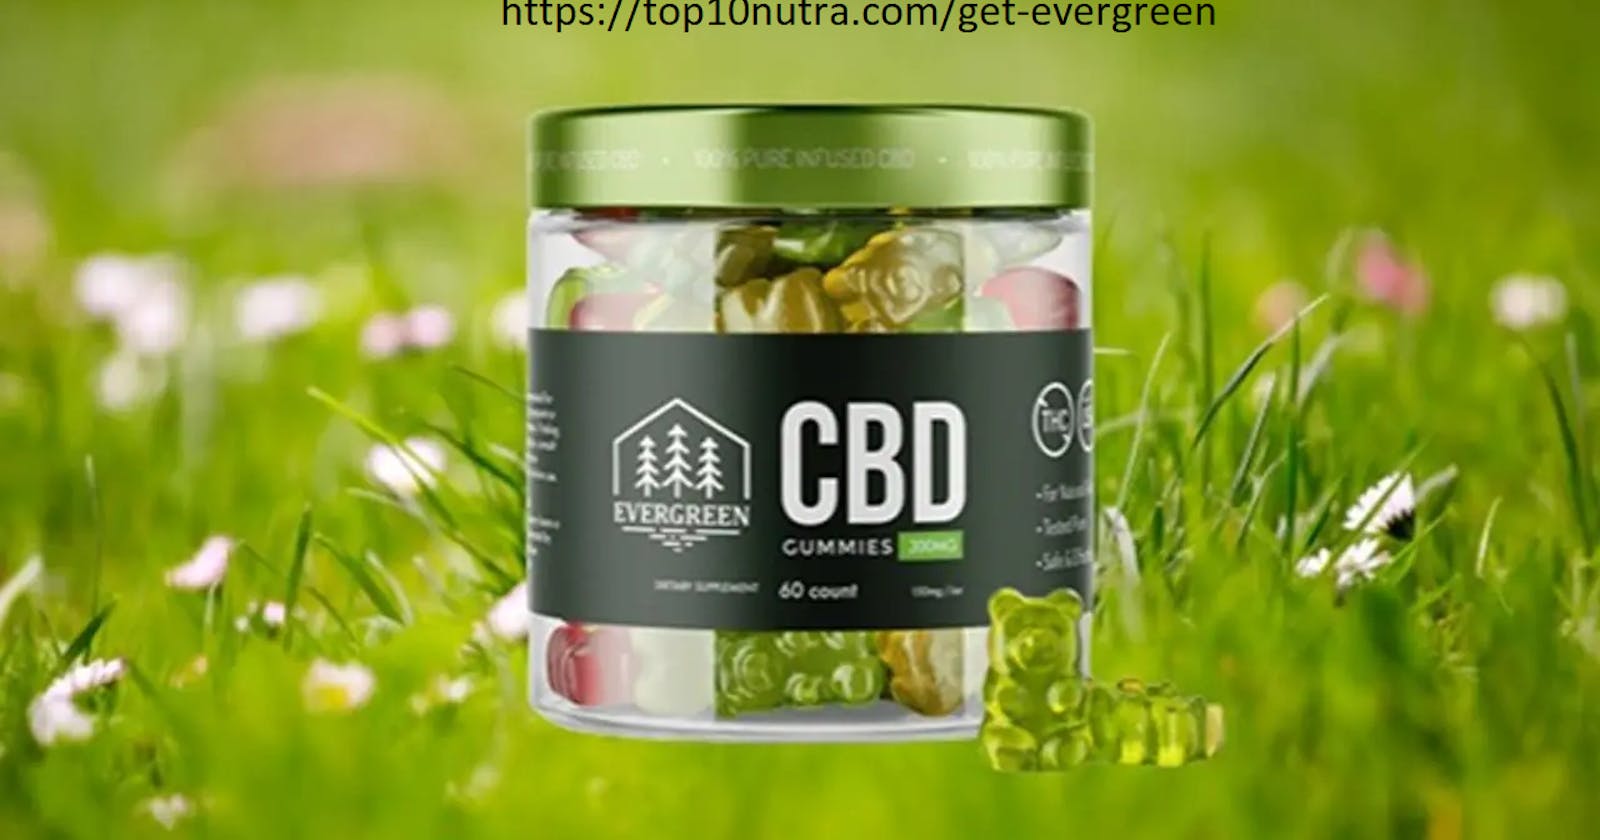 How Evergreen CBD Gummies Canada Can Help You Relieve Pain, Stress, and Anxiety Naturally